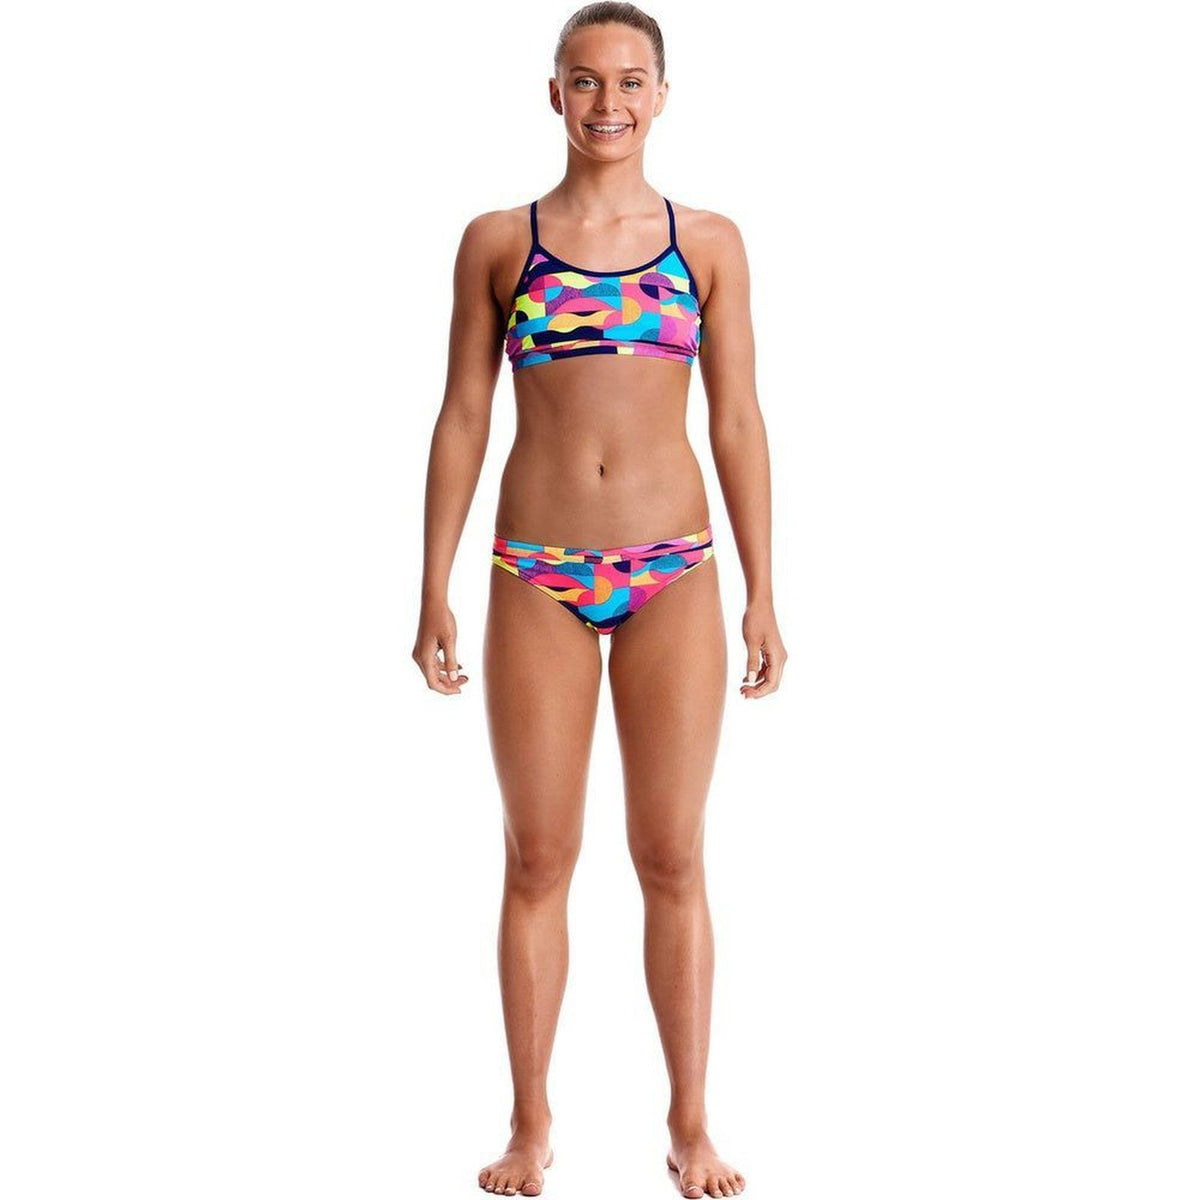 Funkita Girls Racer Back Two Piece - Mad Mist